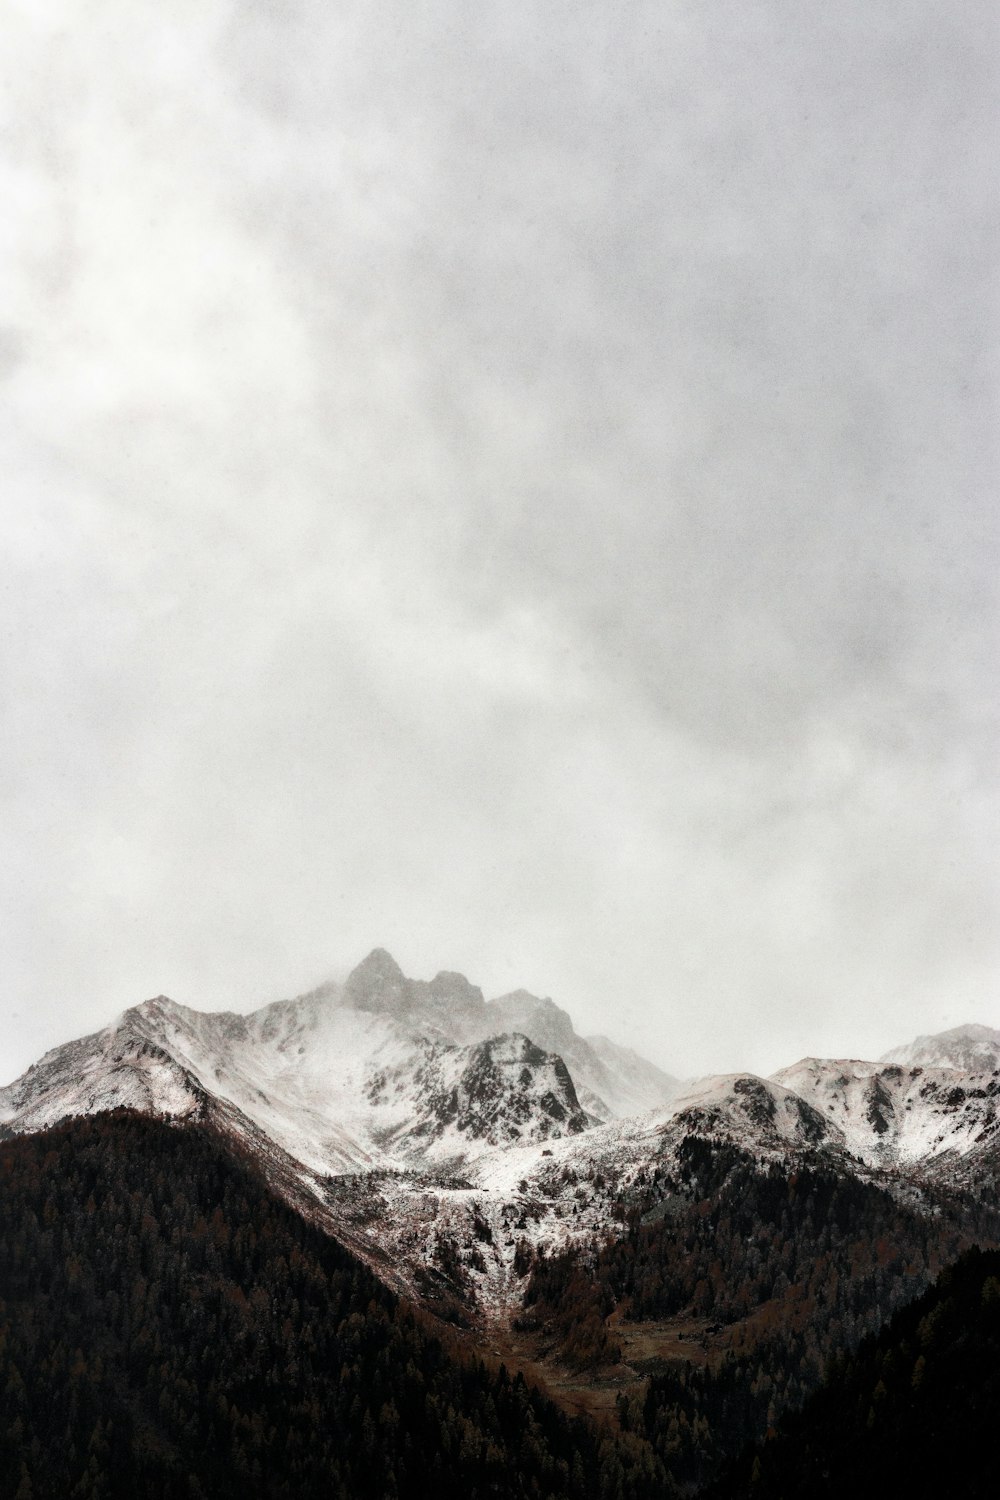 iced cap mountain under gray sky during daytime photography